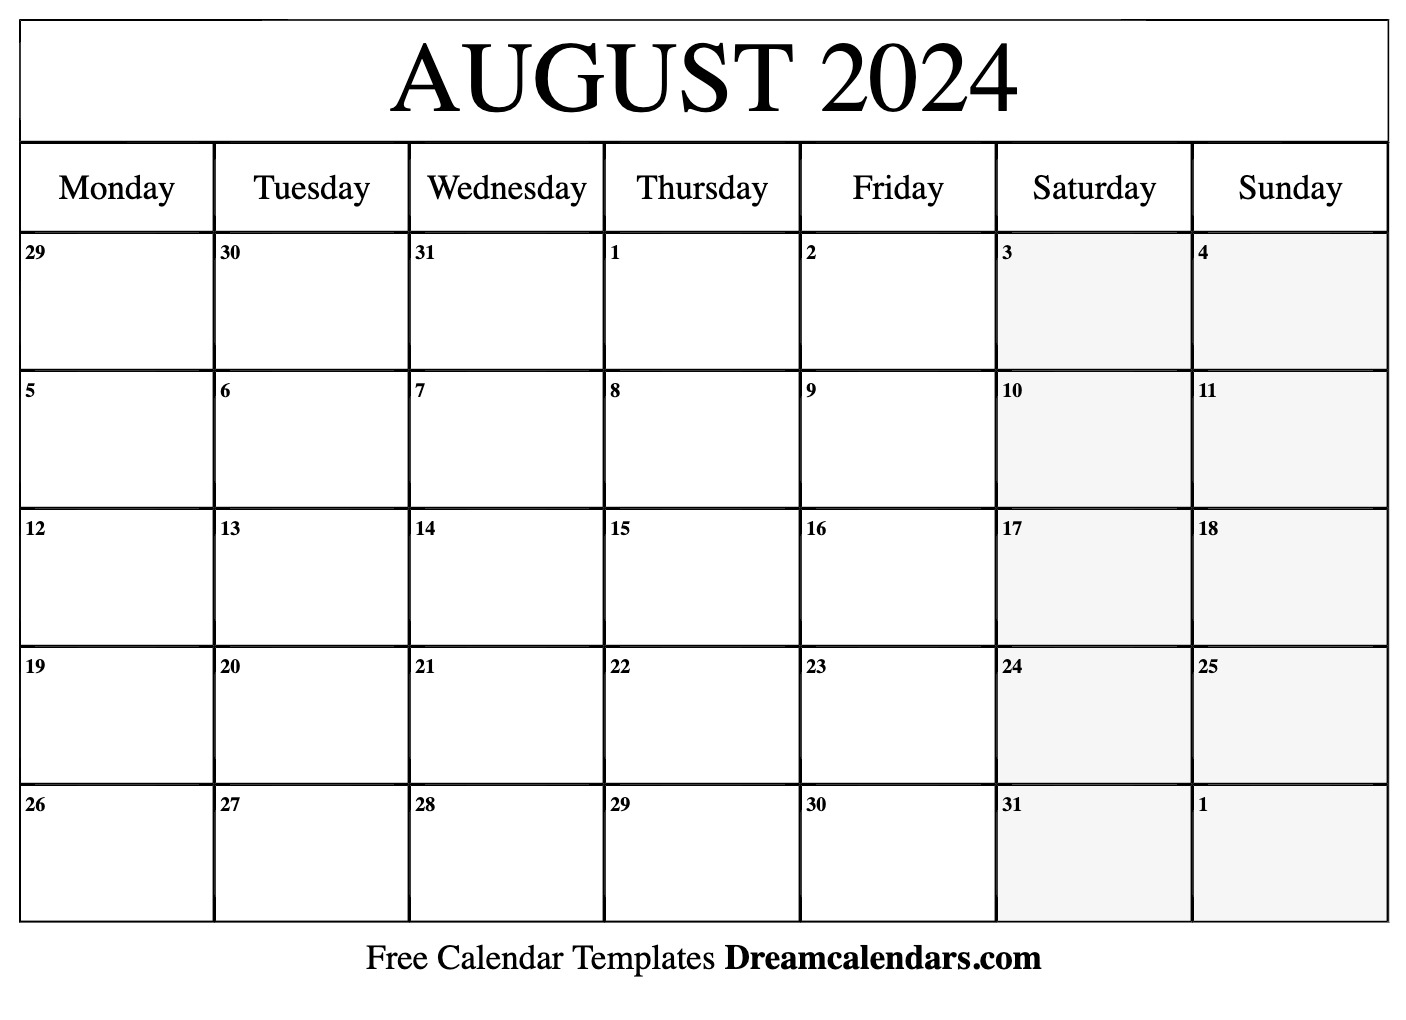 August 2024 Calendar | Free Blank Printable With Holidays for Calendar Template August 2024 Printable